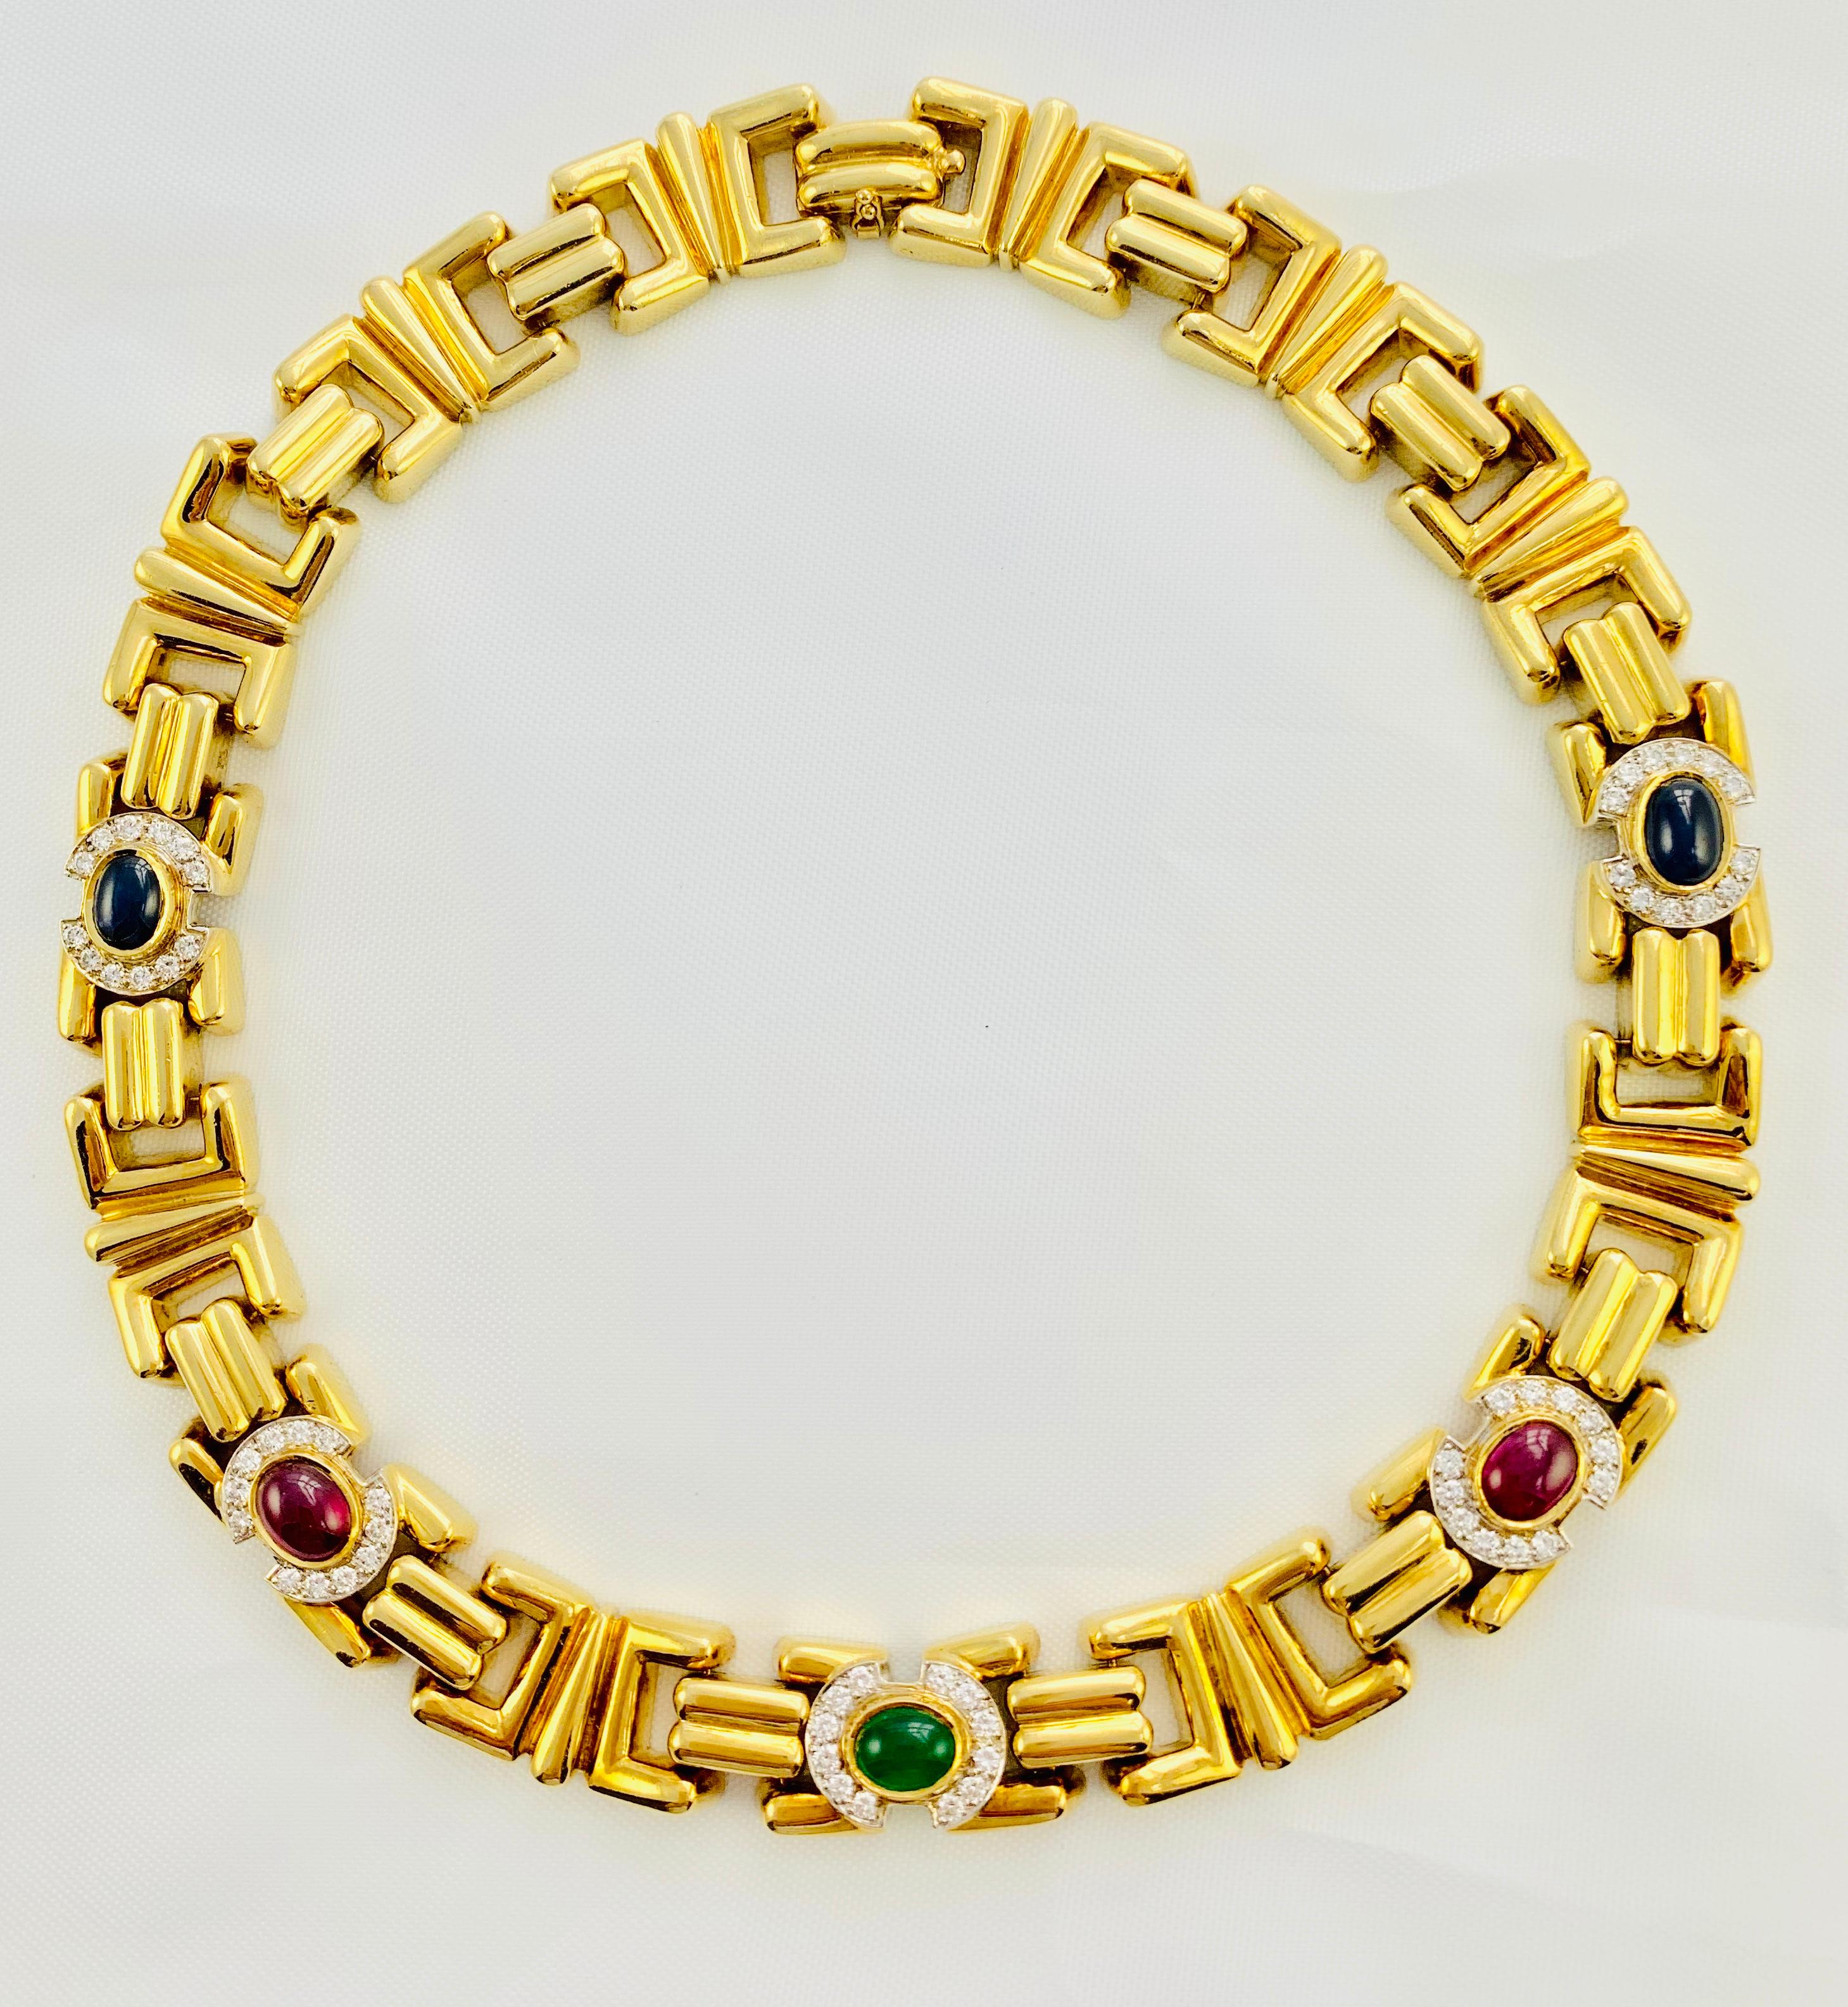 This very important 18K yellow Gold Suite Consists of a 16 inch, repeating link, choker necklace that is set with two 8 by 6mm cabochon cut sapphires, two 8 by 6mm cabochon cut rubies and one 8 by 6mm cabochon cut emerald! These gorgeous stones are